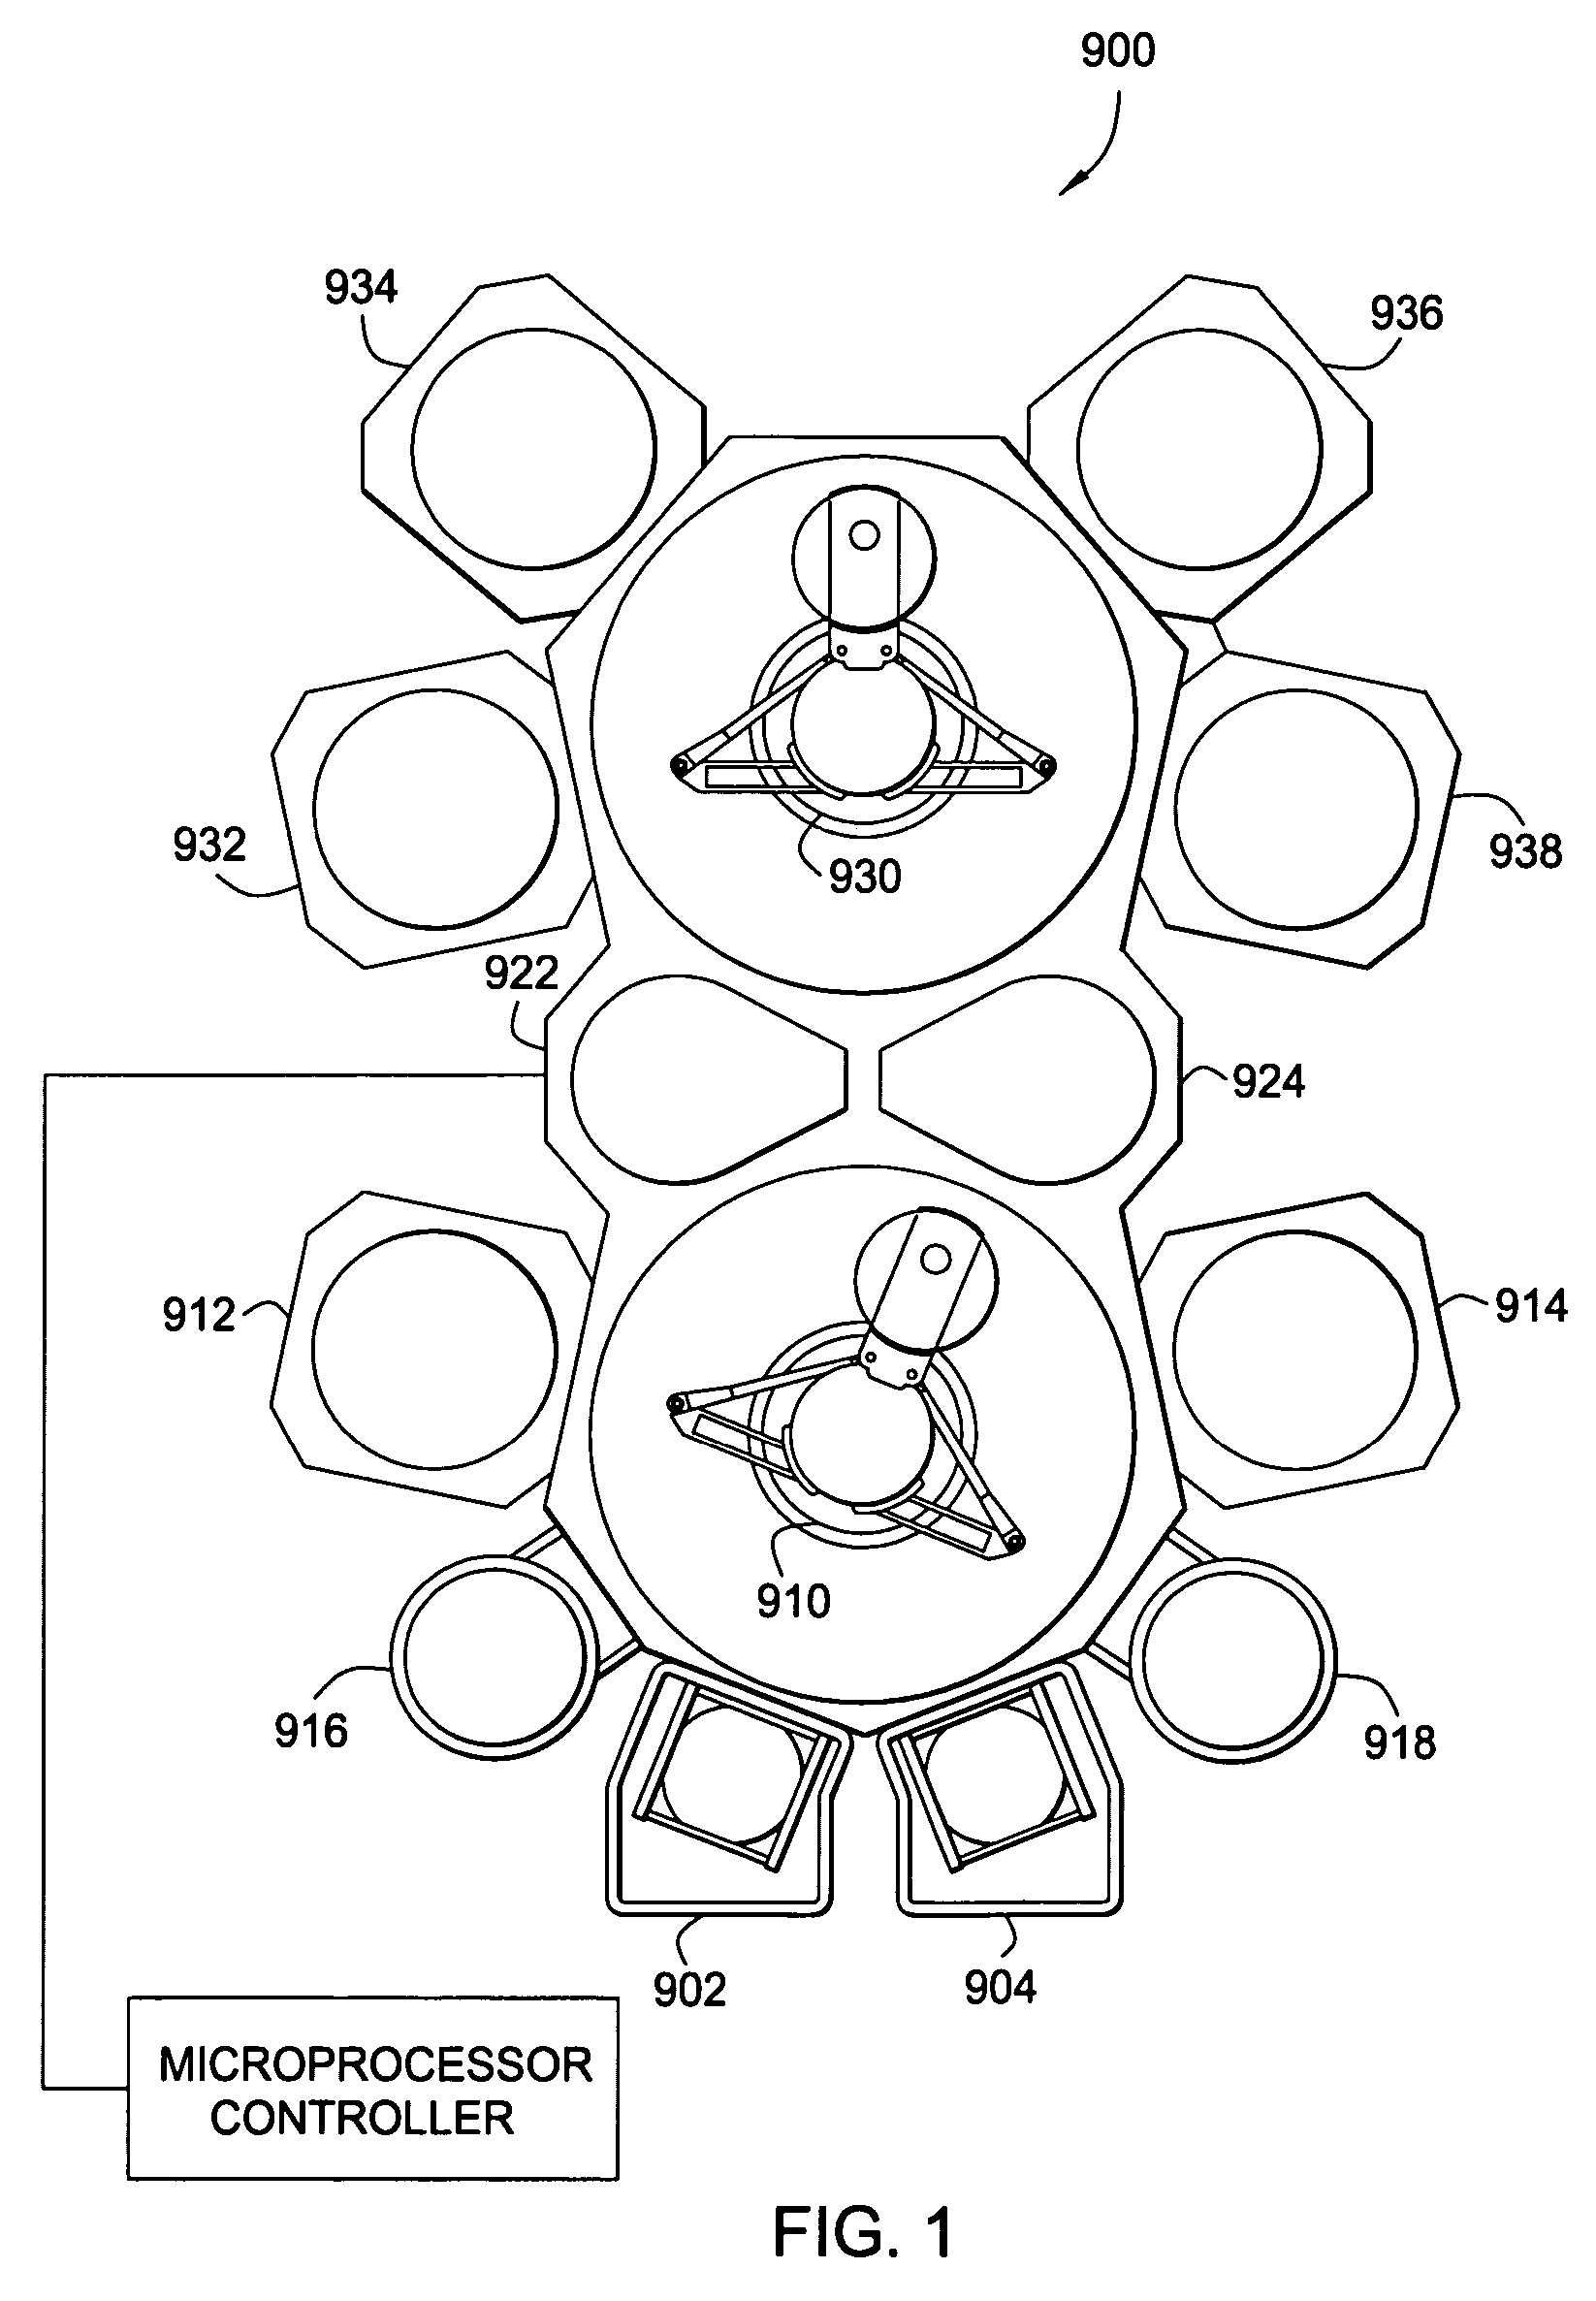 Reduction of copper dewetting by transition metal deposition